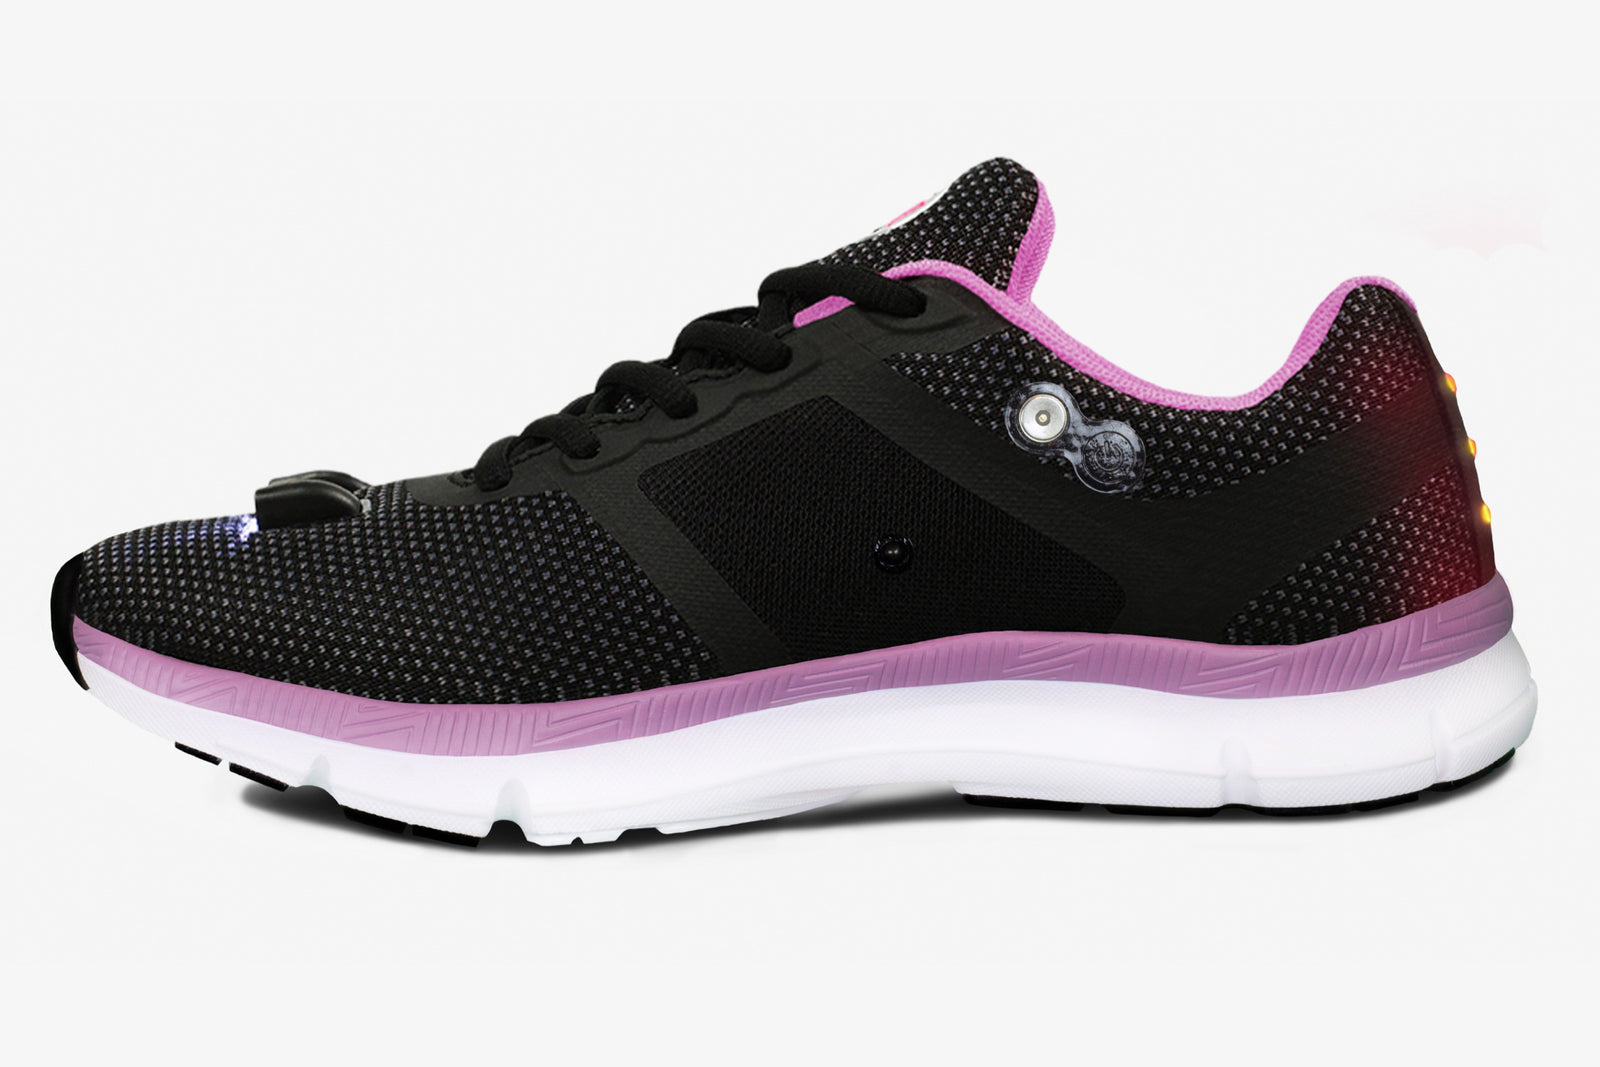 Women's Night Runner Shoes With Built-in Safety Lights